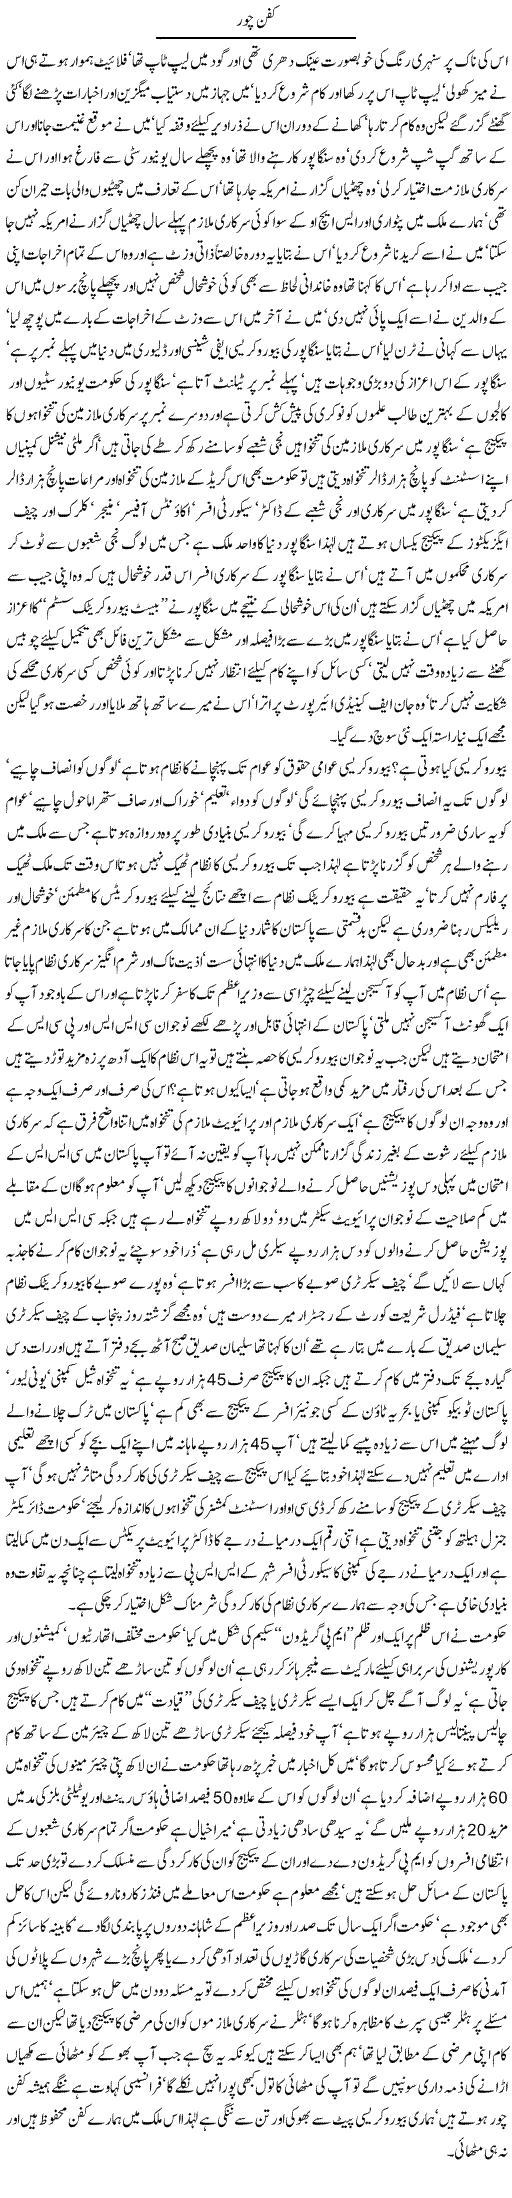 Kafan chor By Javed Chaudhry